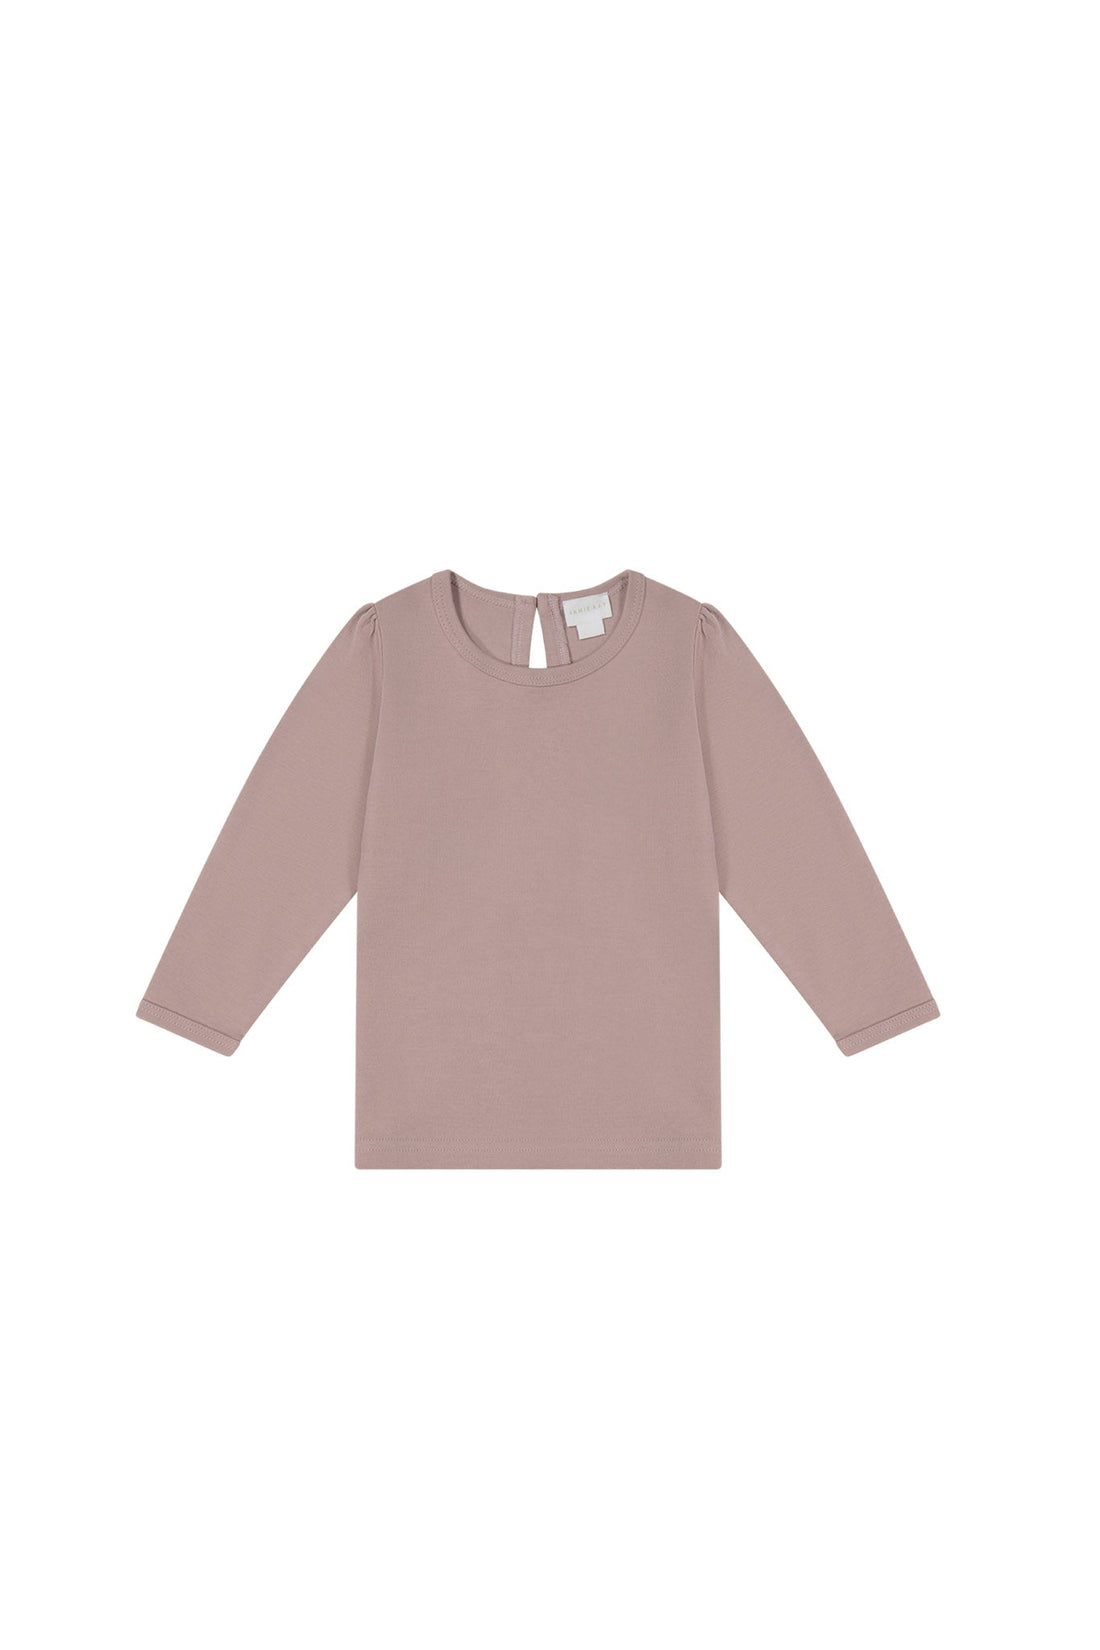 Pima Cotton Cindy Top - Softest Mauve Childrens Top from Jamie Kay NZ